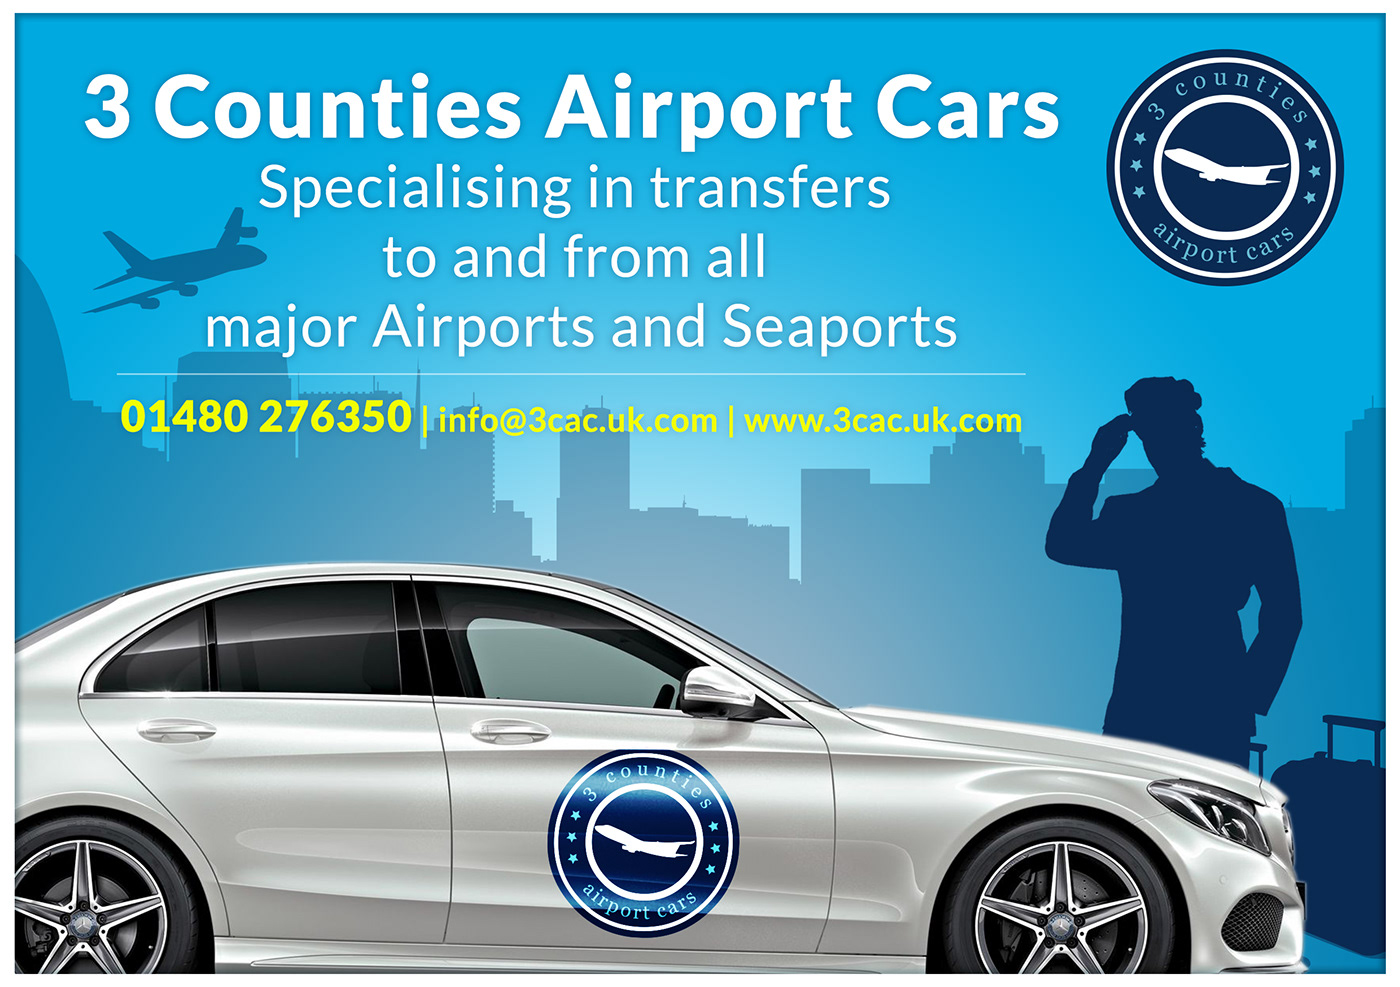 logo airport_cars airport Cars branding  marketing   ferry drivers driver photoshop